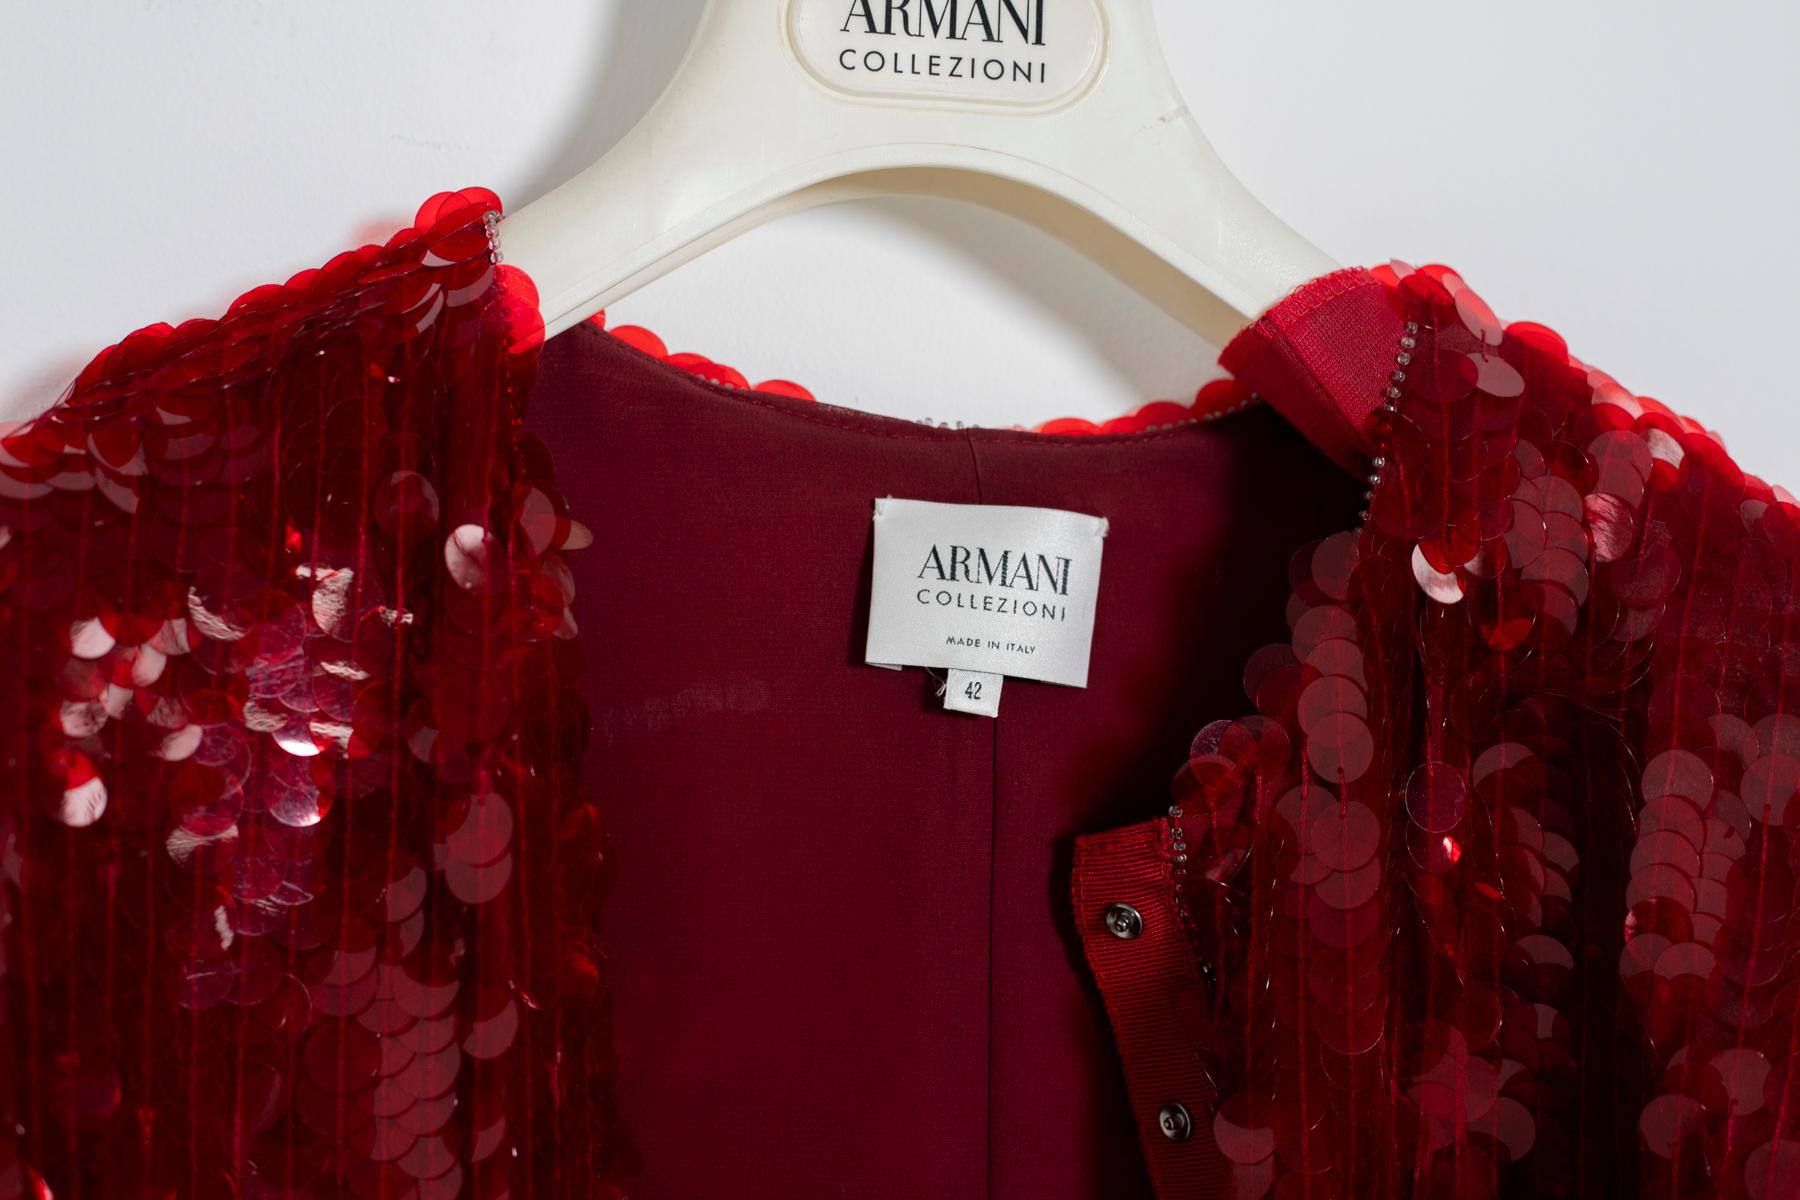 Jacket or Blazer by Armani Collezioni from the 2000s.
The jacket has a dark red silk lining. Its particularity is its great workmanship with hand-stitched sequins applications in red colour. Click closure.  Great Italian craftsmanship. Evening